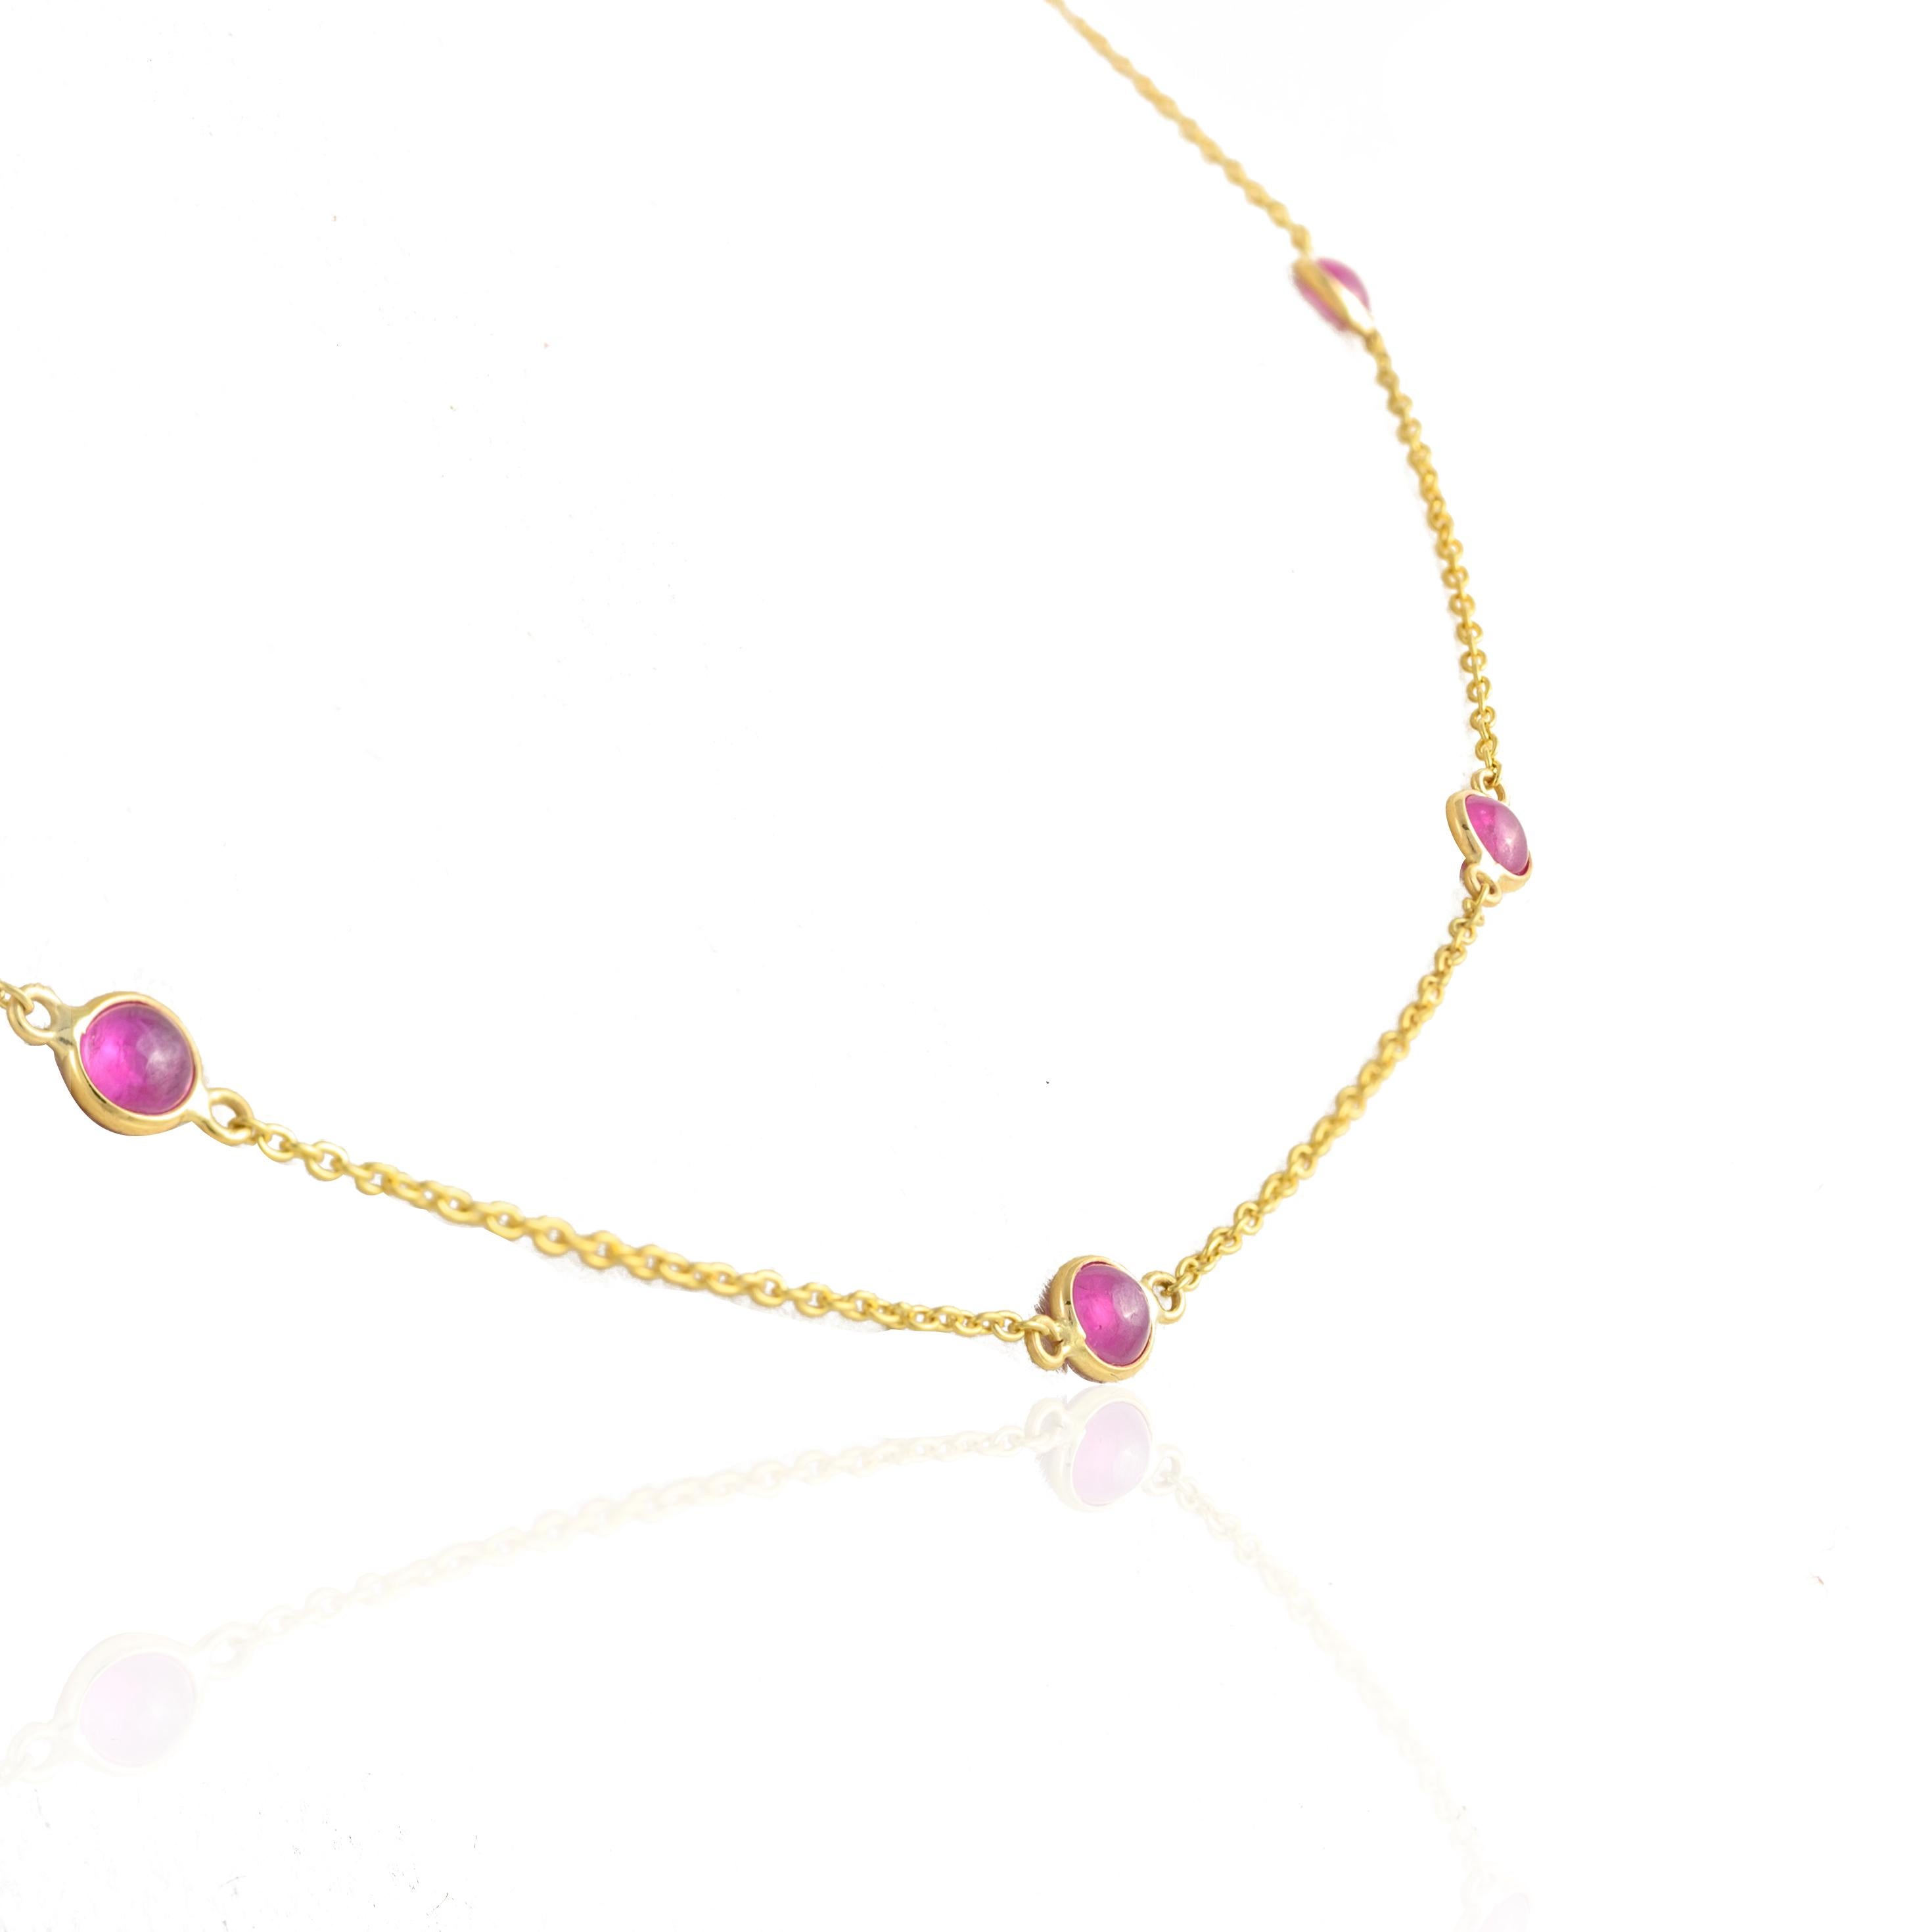 Round Cut Real Ruby Station Chain Necklace 14k Solid Yellow Gold, Christmas Gift For Her